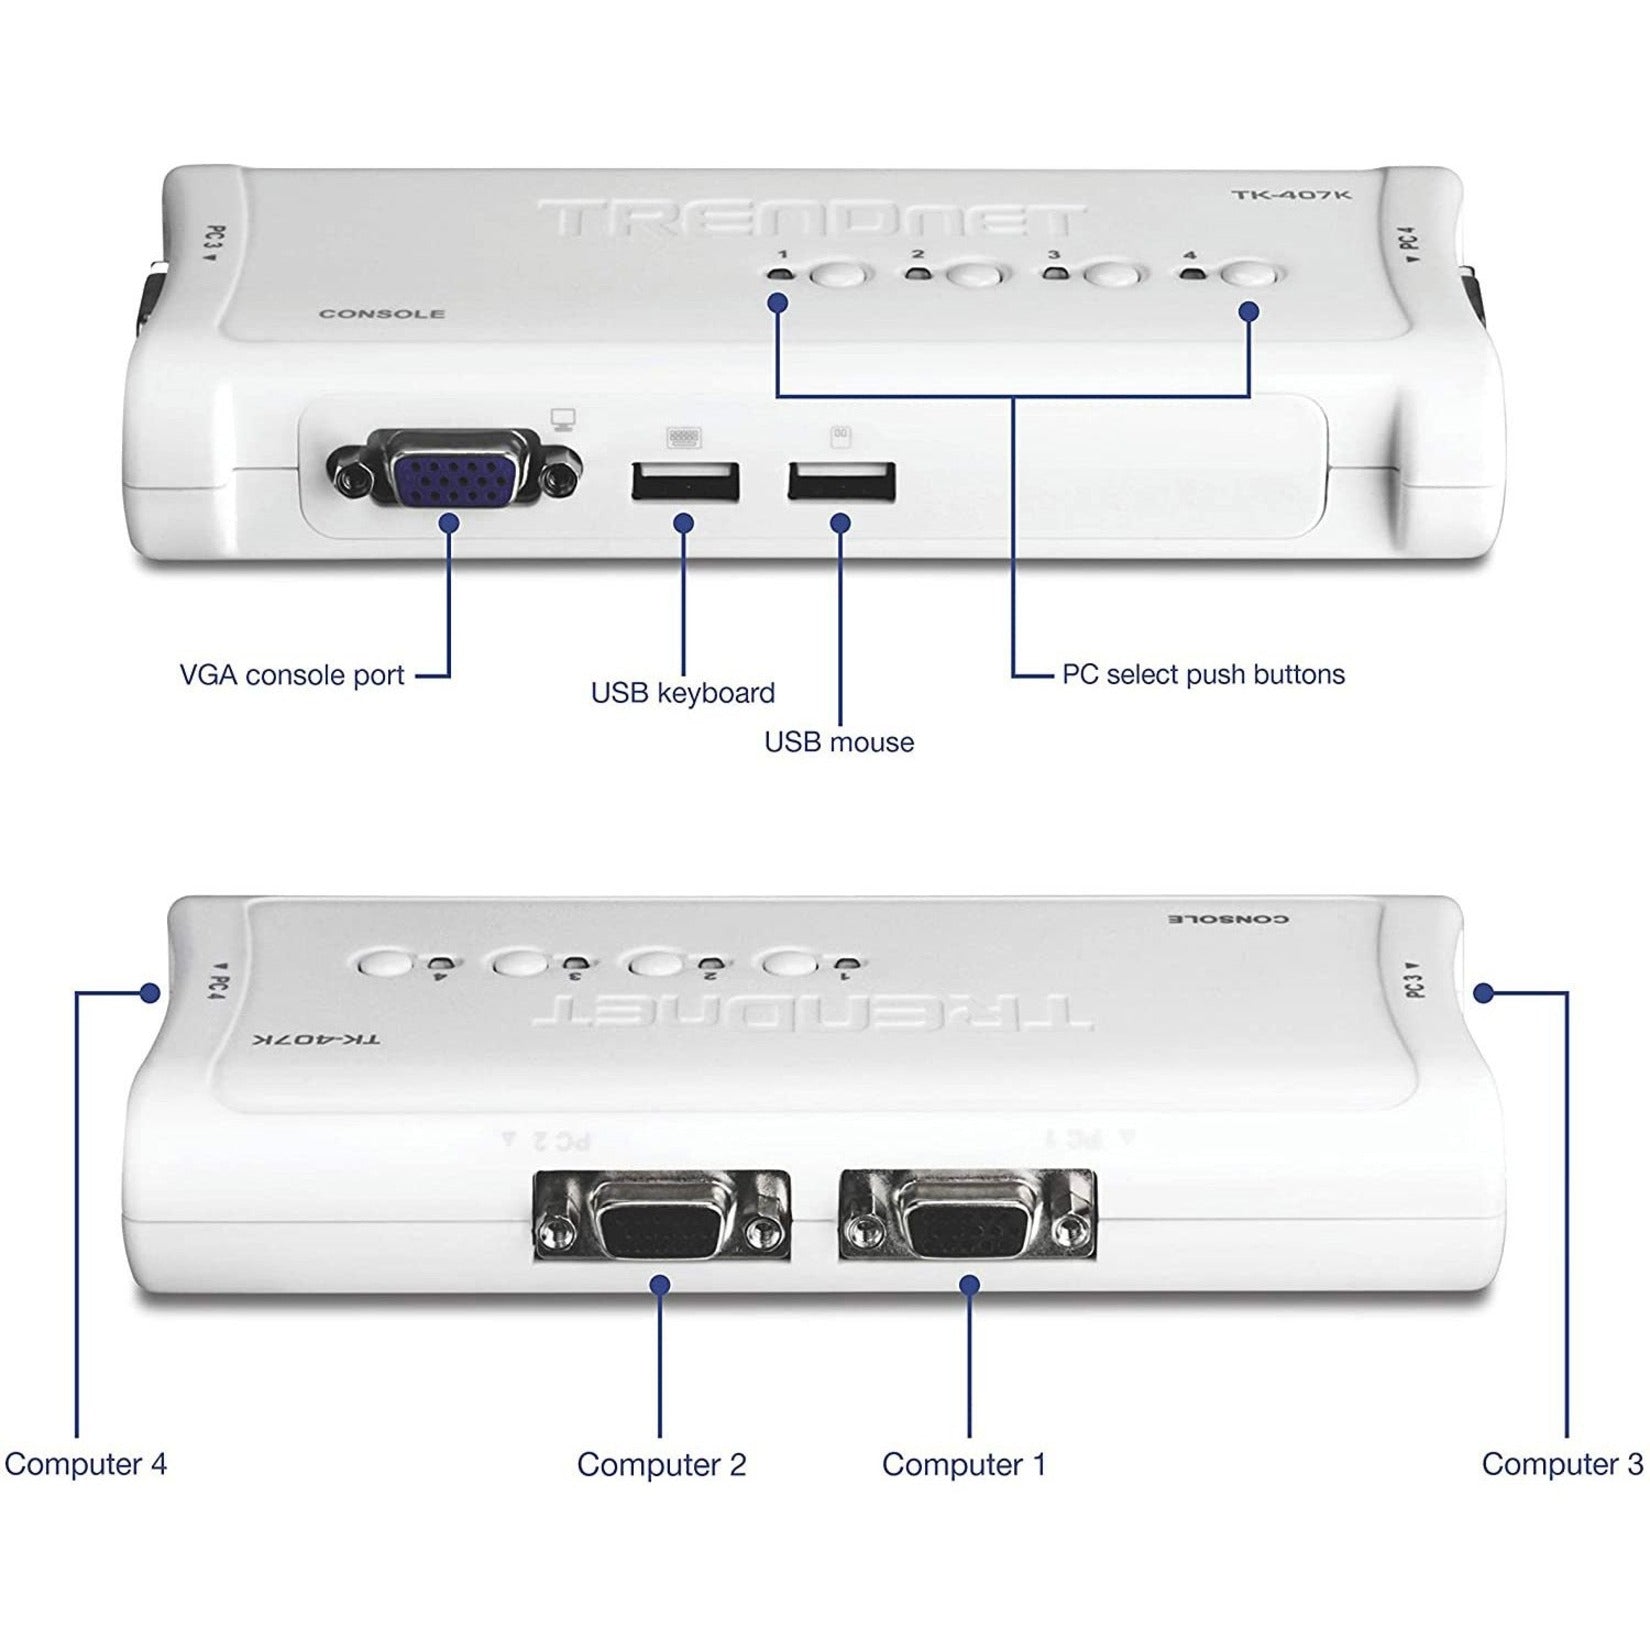 TRENDnet 4-Port USB KVM Switch Kit, VGA And USB Connections, 2048 x 1536 Resolution, Cabling Included, Control Up To 4 Computers, Compliant With Window, Linux, and Mac OS, White, TK-407K (TK-407K) Alternate-Image2 image